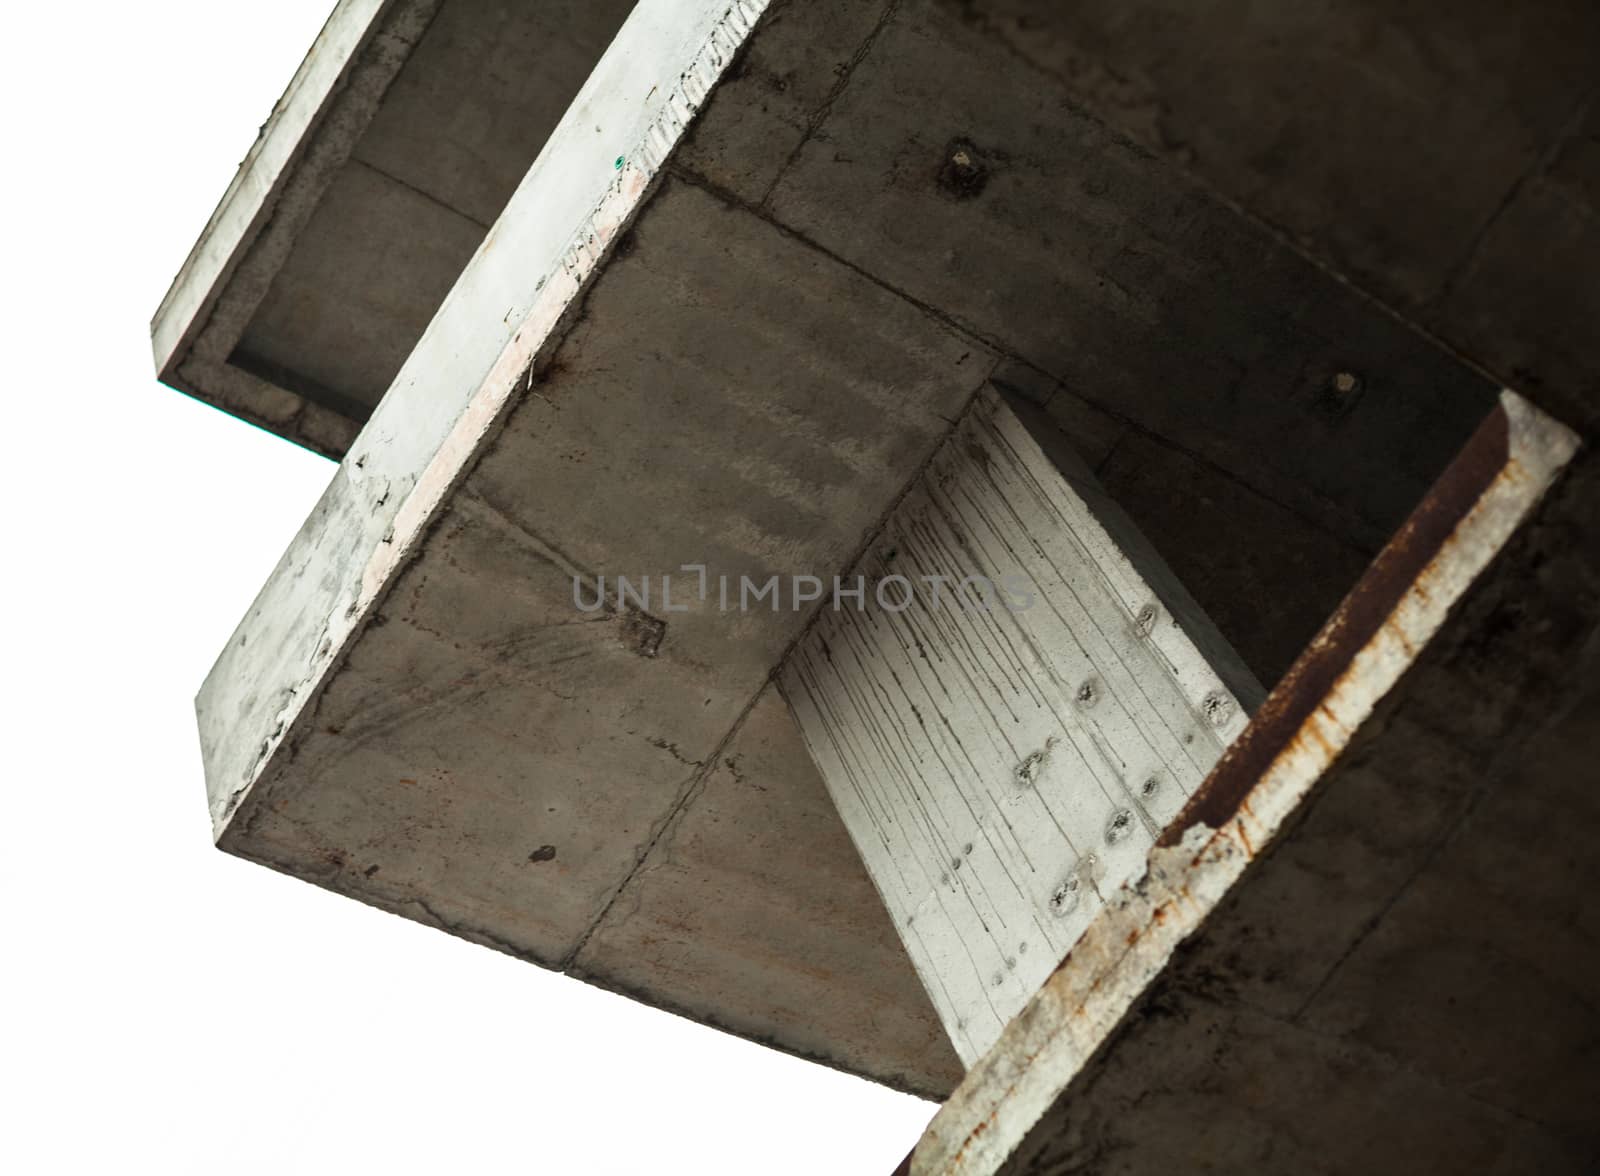 Concrete surfaces of the unfinished building by rootstocks